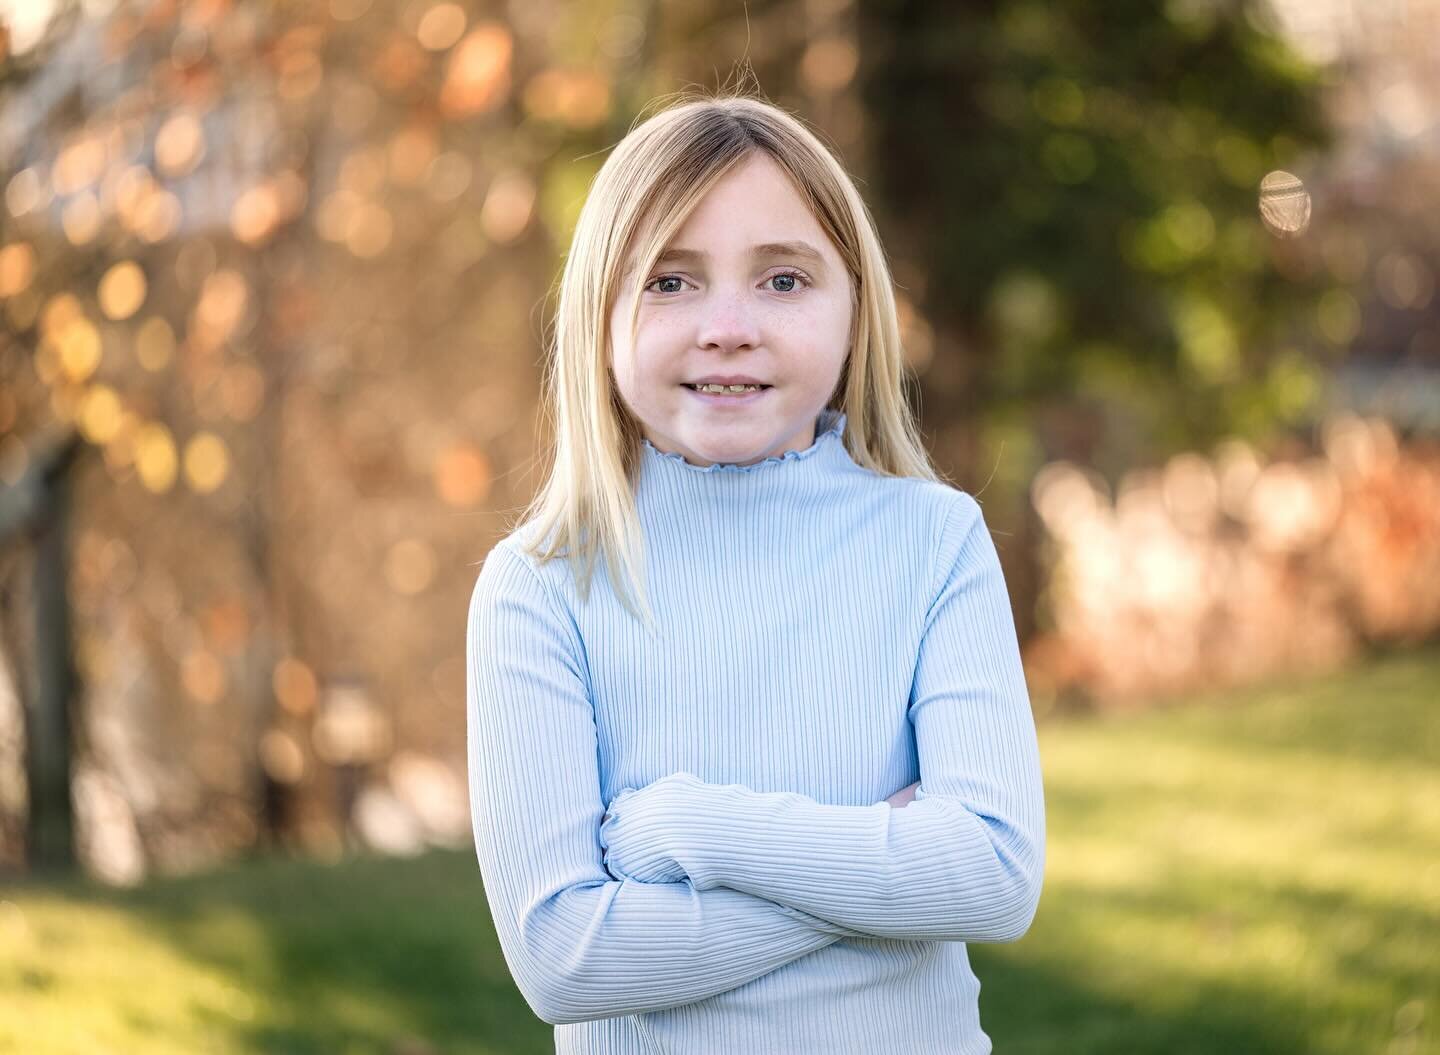 Meet Avery - an incredible 11 year old warrior I had the honor of photographing through @thegoldhopeproject .  Avery is battling a brain tumor.  I captured her with her parents and sister Lexi last December.  You can read all about our session and al